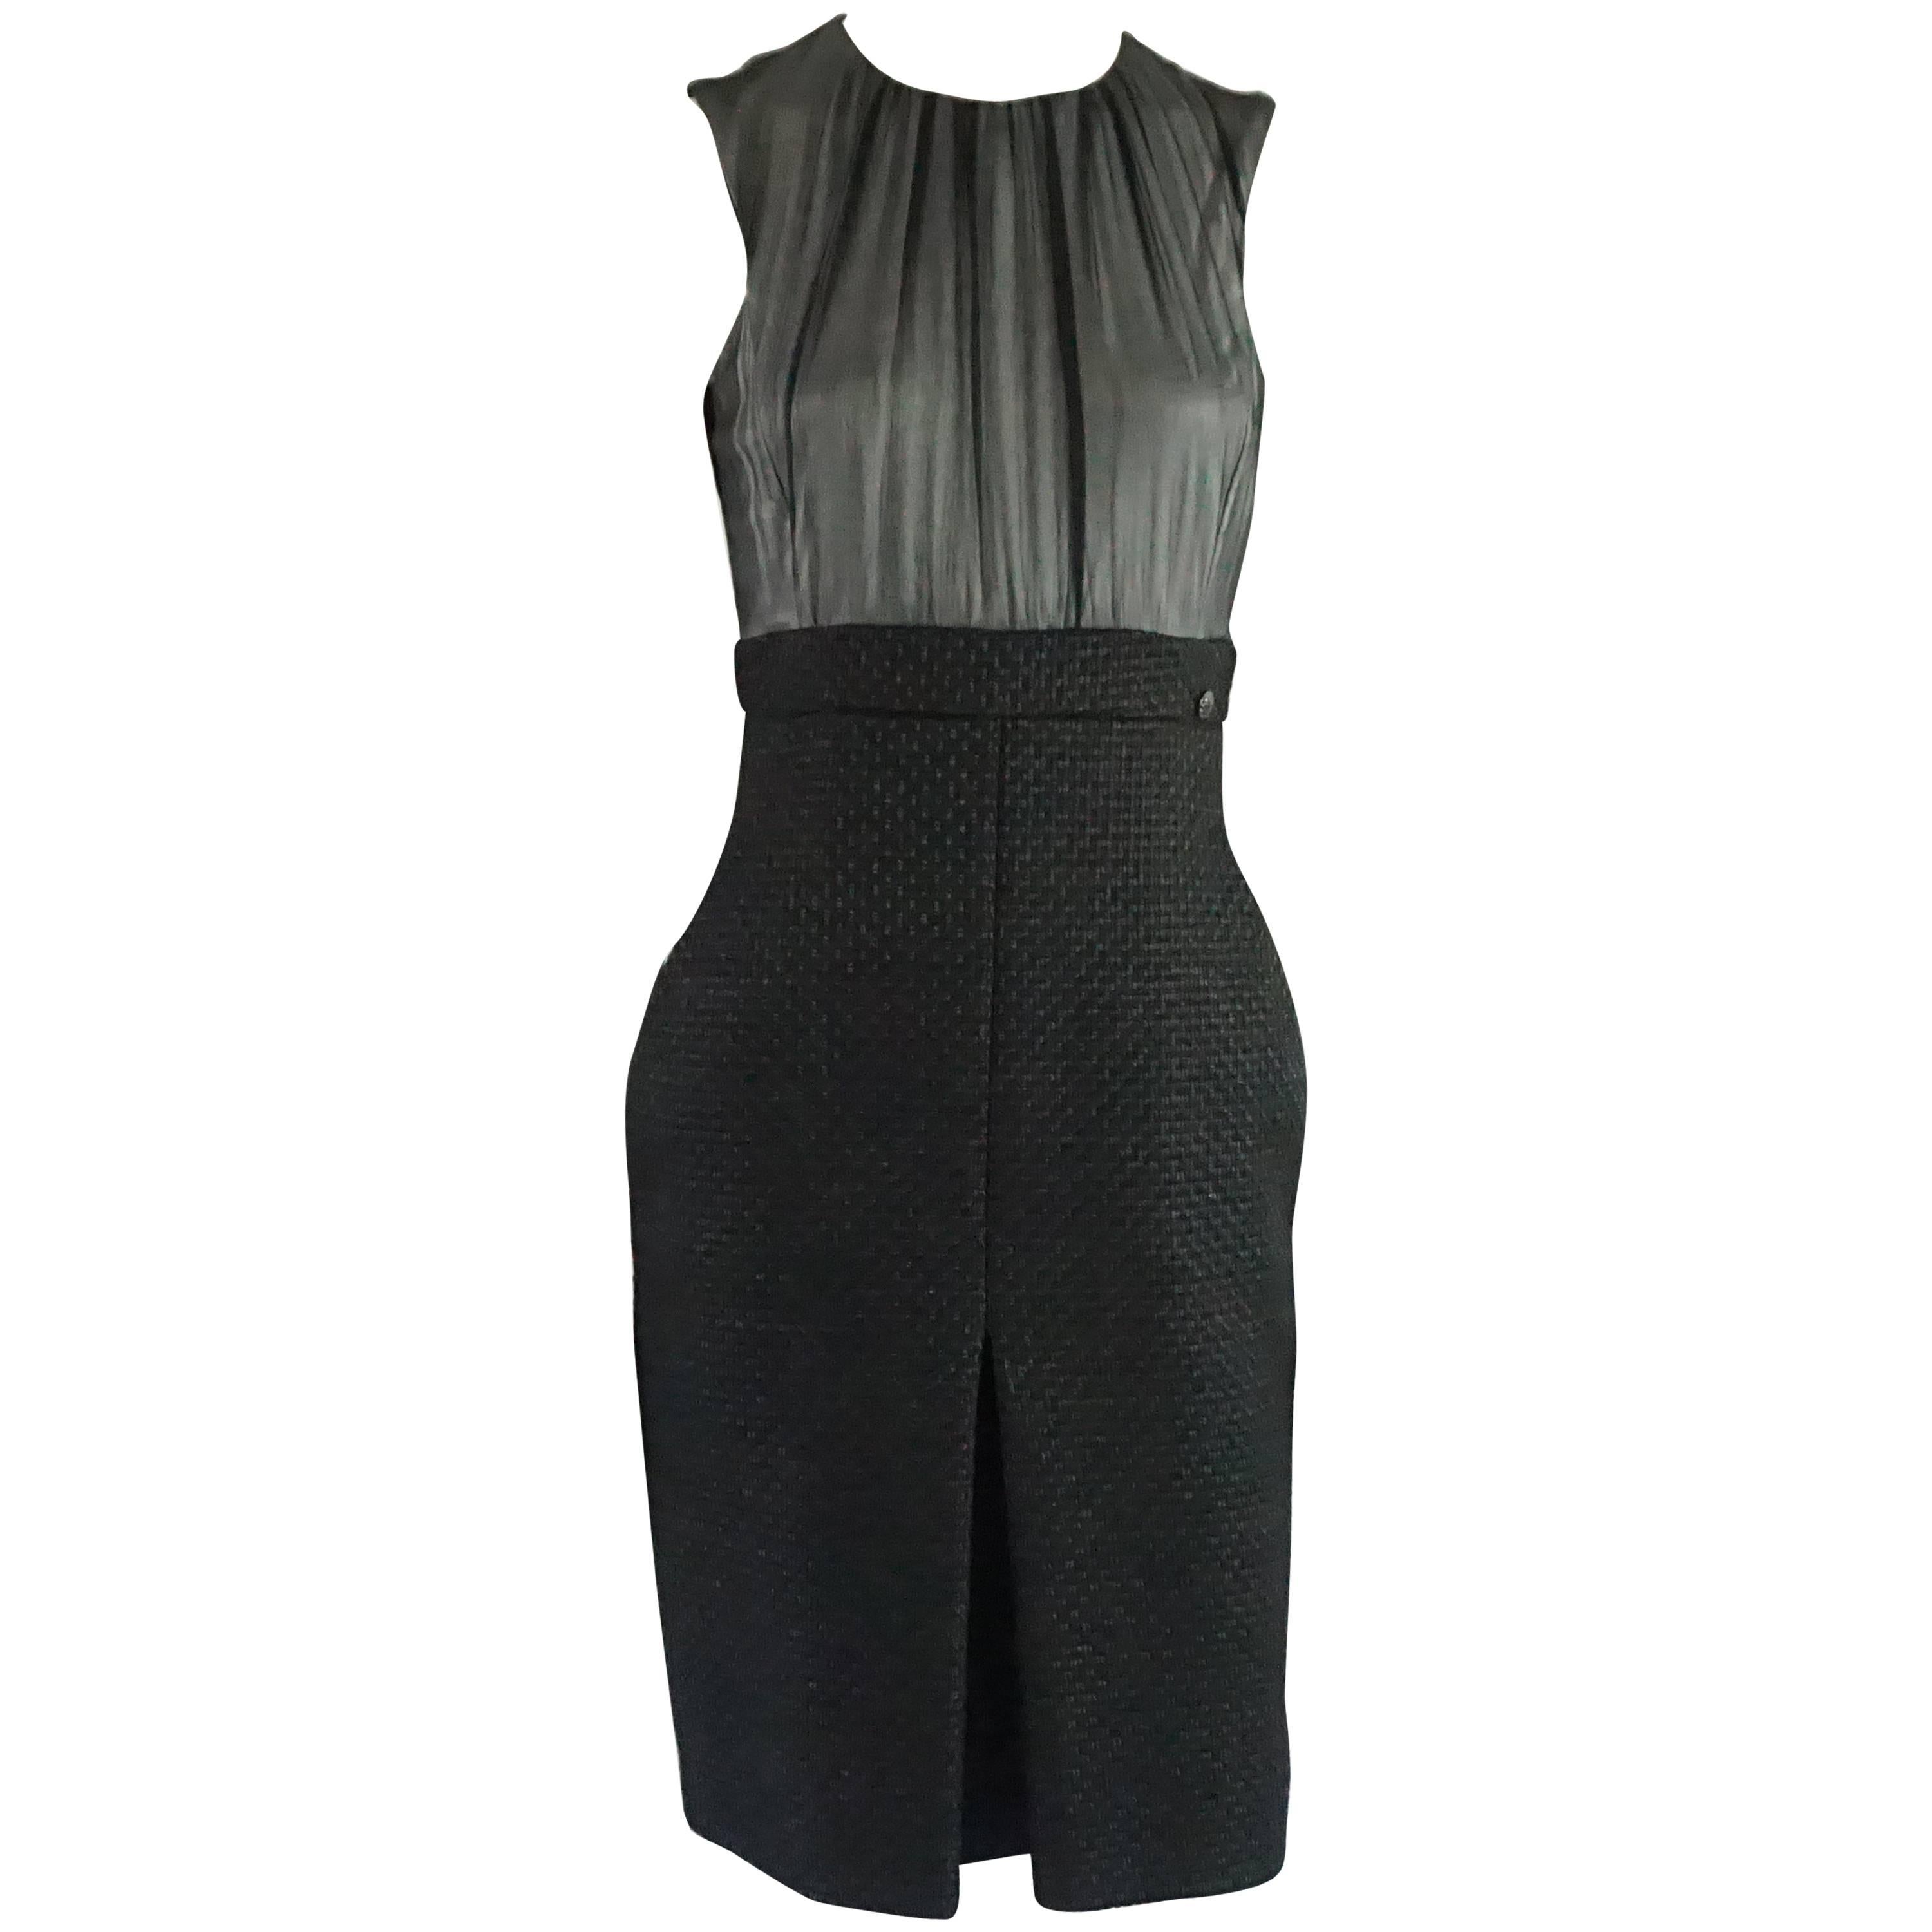 Chanel Black Dress with Silk Chiffon Top and Tweed Skirt - 38 For Sale